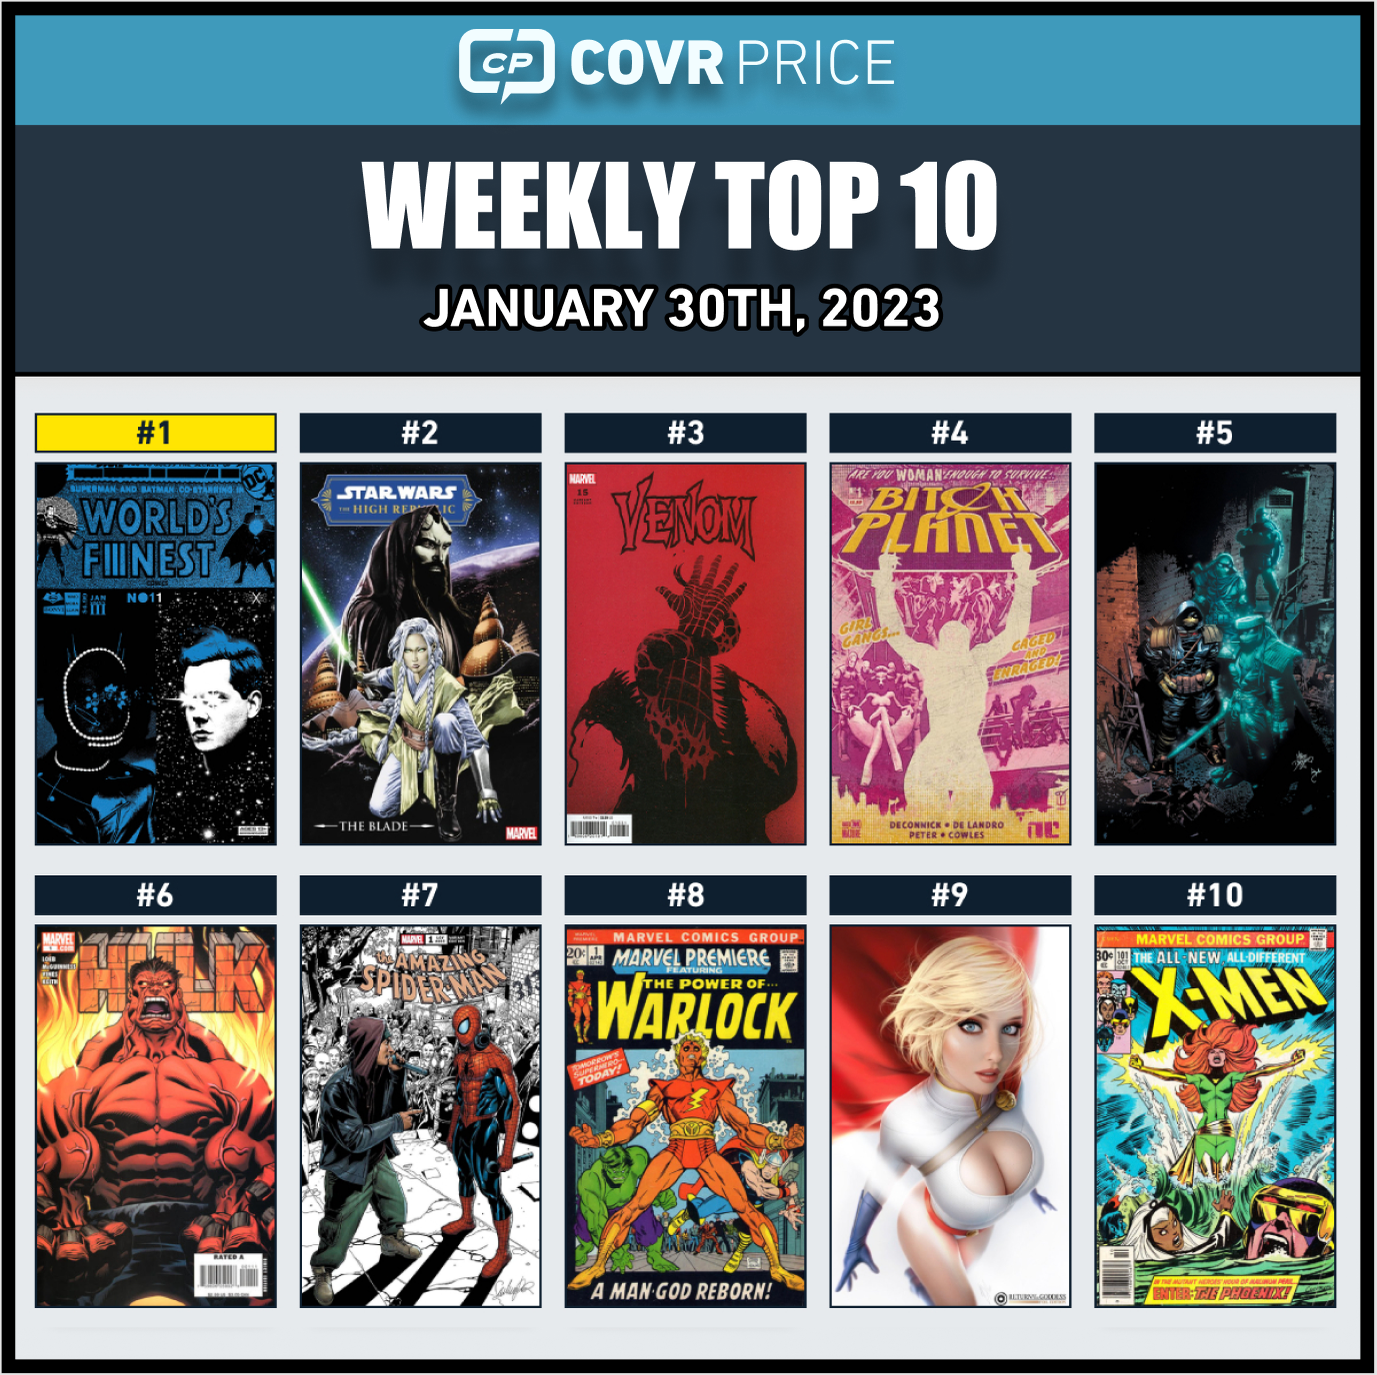 CovrPrice Weekly Top 10 January 30, 2023